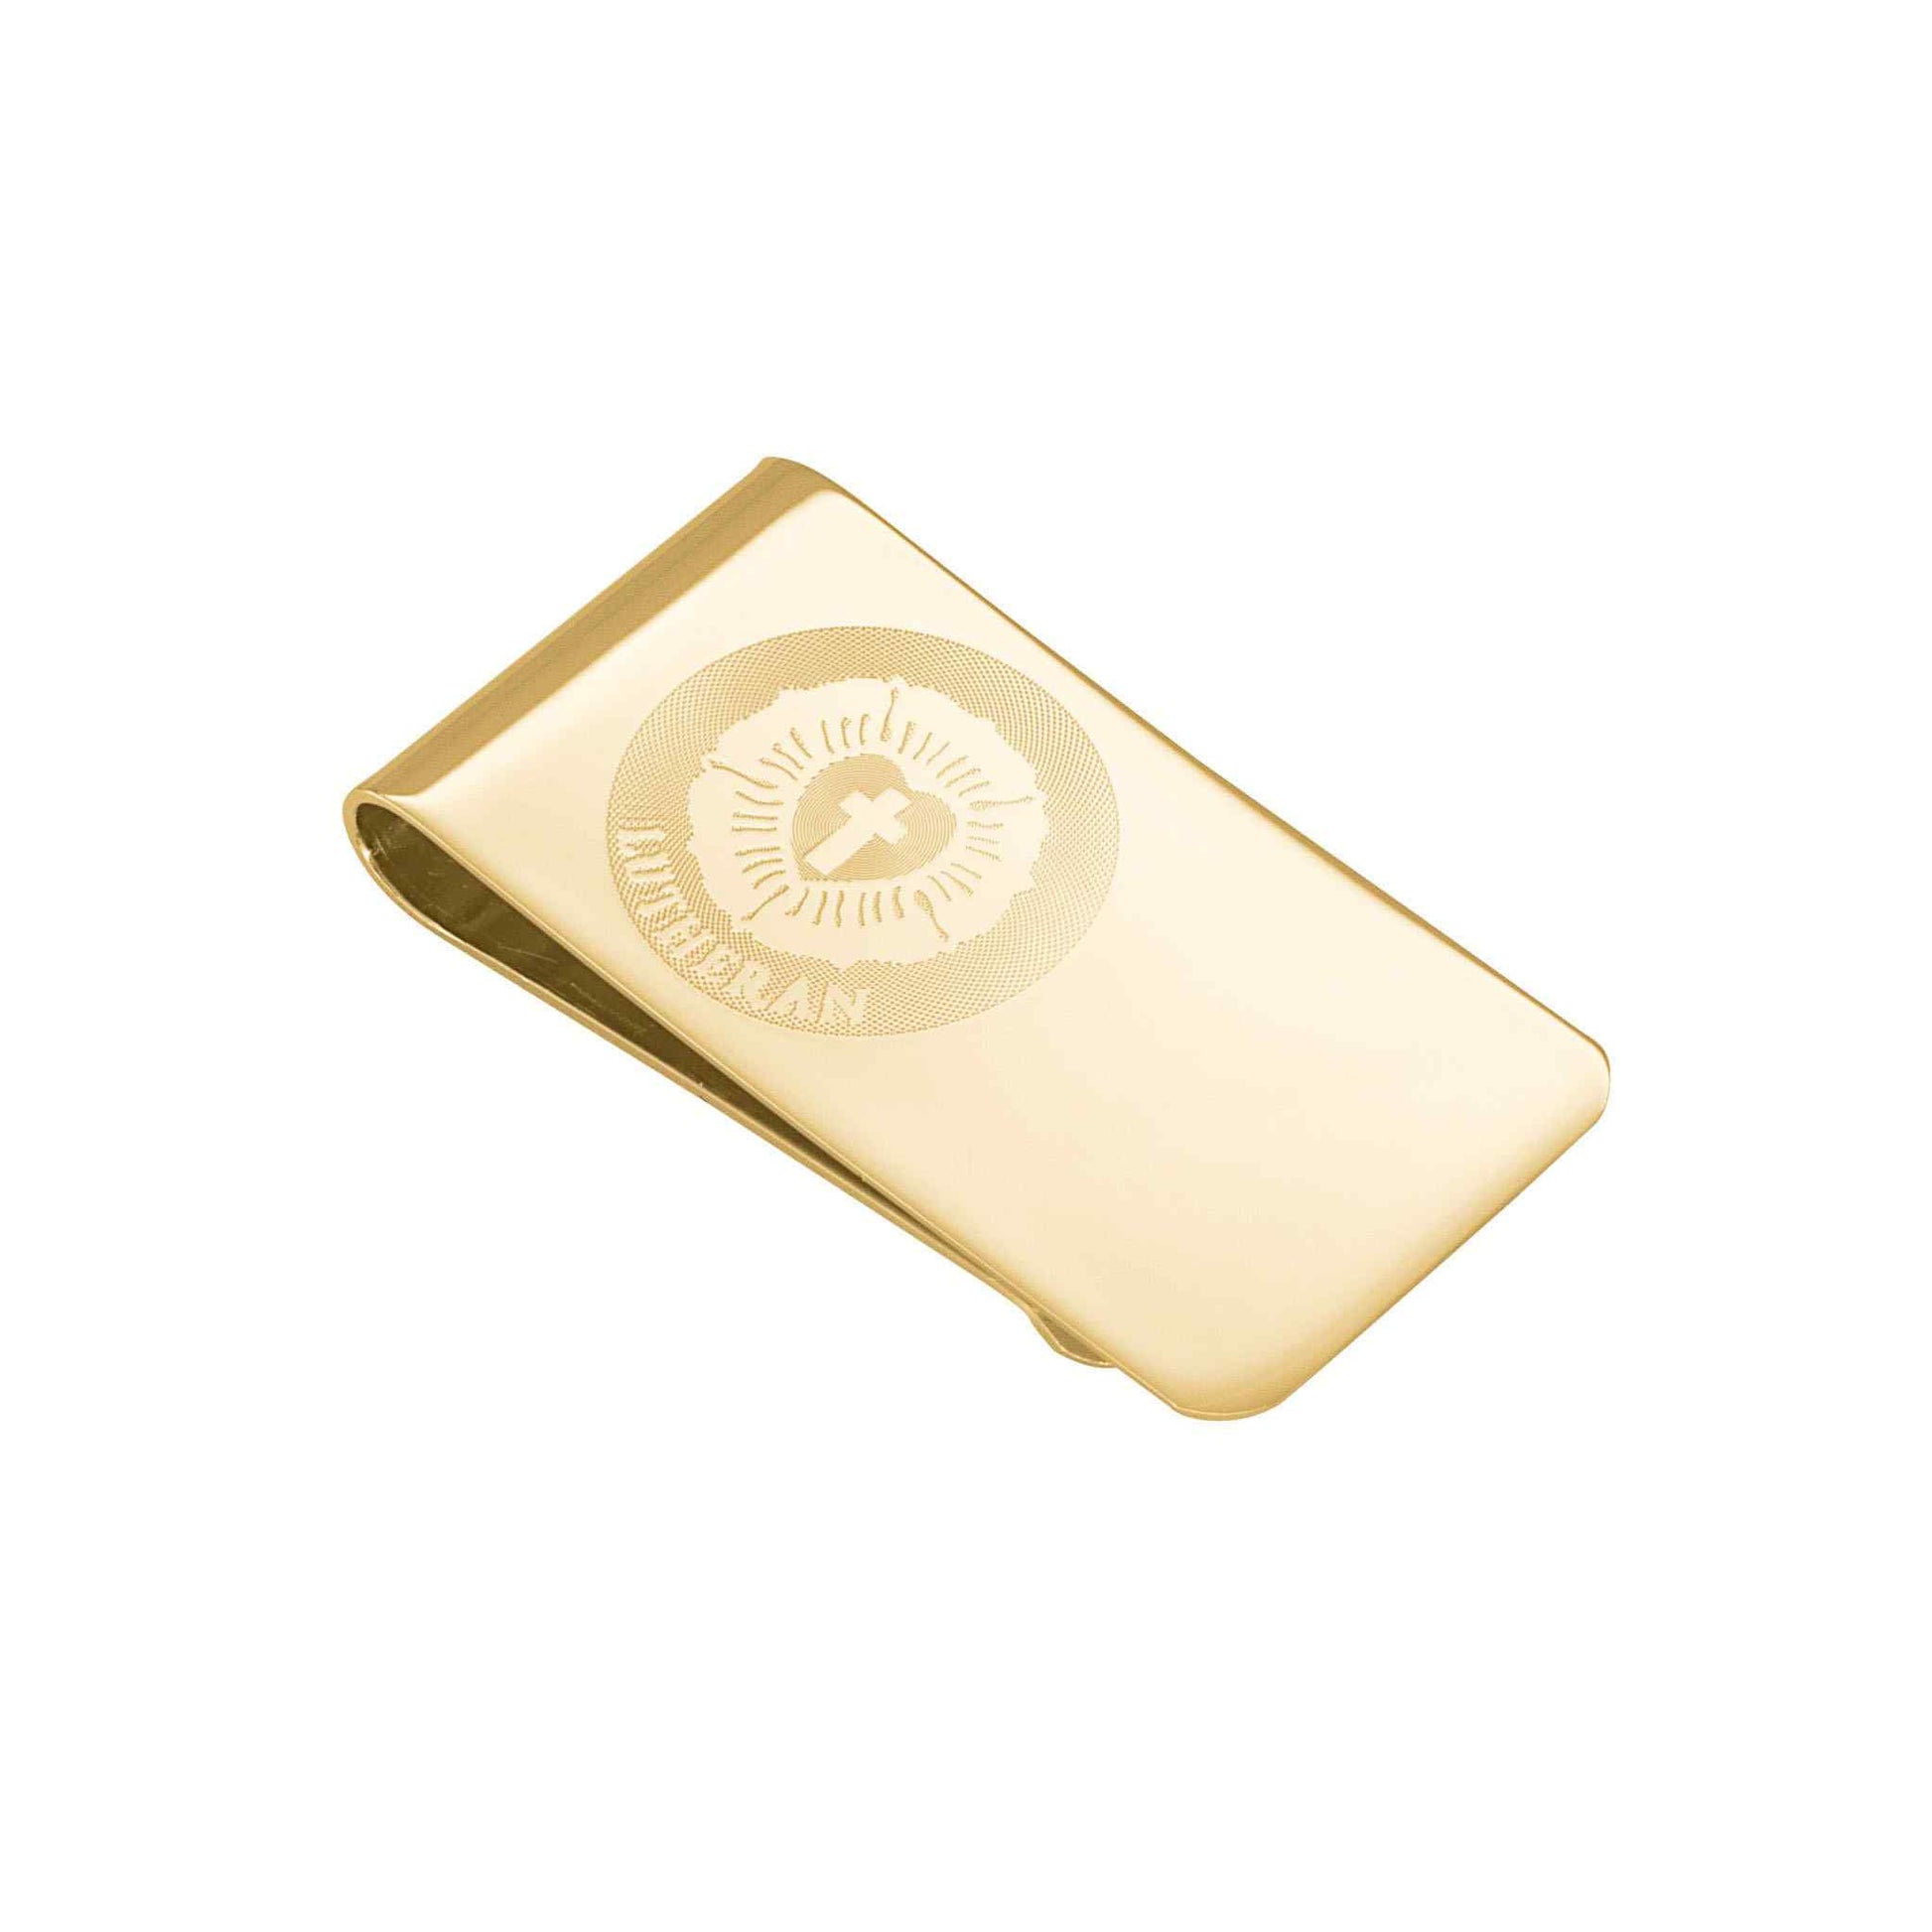 A emblem money clip displayed on a neutral white background.